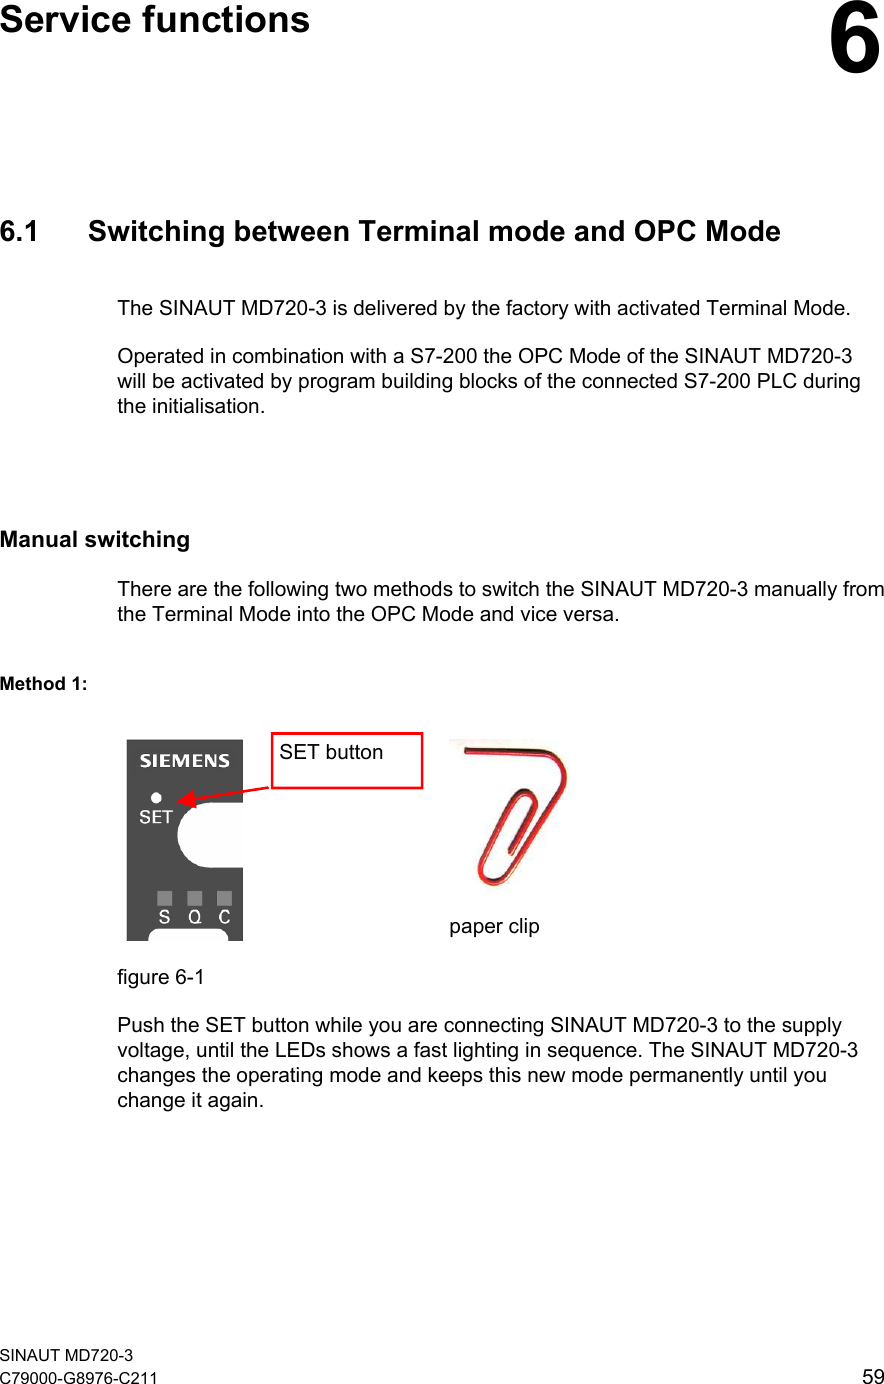   Service functions  6 6.1  Switching between Terminal mode and OPC Mode The SINAUT MD720-3 is delivered by the factory with activated Terminal Mode. Operated in combination with a S7-200 the OPC Mode of the SINAUT MD720-3 will be activated by program building blocks of the connected S7-200 PLC during the initialisation.  Manual switching There are the following two methods to switch the SINAUT MD720-3 manually from the Terminal Mode into the OPC Mode and vice versa. Method 1:    paper clip SET button figure 6-1 Push the SET button while you are connecting SINAUT MD720-3 to the supply voltage, until the LEDs shows a fast lighting in sequence. The SINAUT MD720-3 changes the operating mode and keeps this new mode permanently until you change it again.  SINAUT MD720-3 C79000-G8976-C211   59 